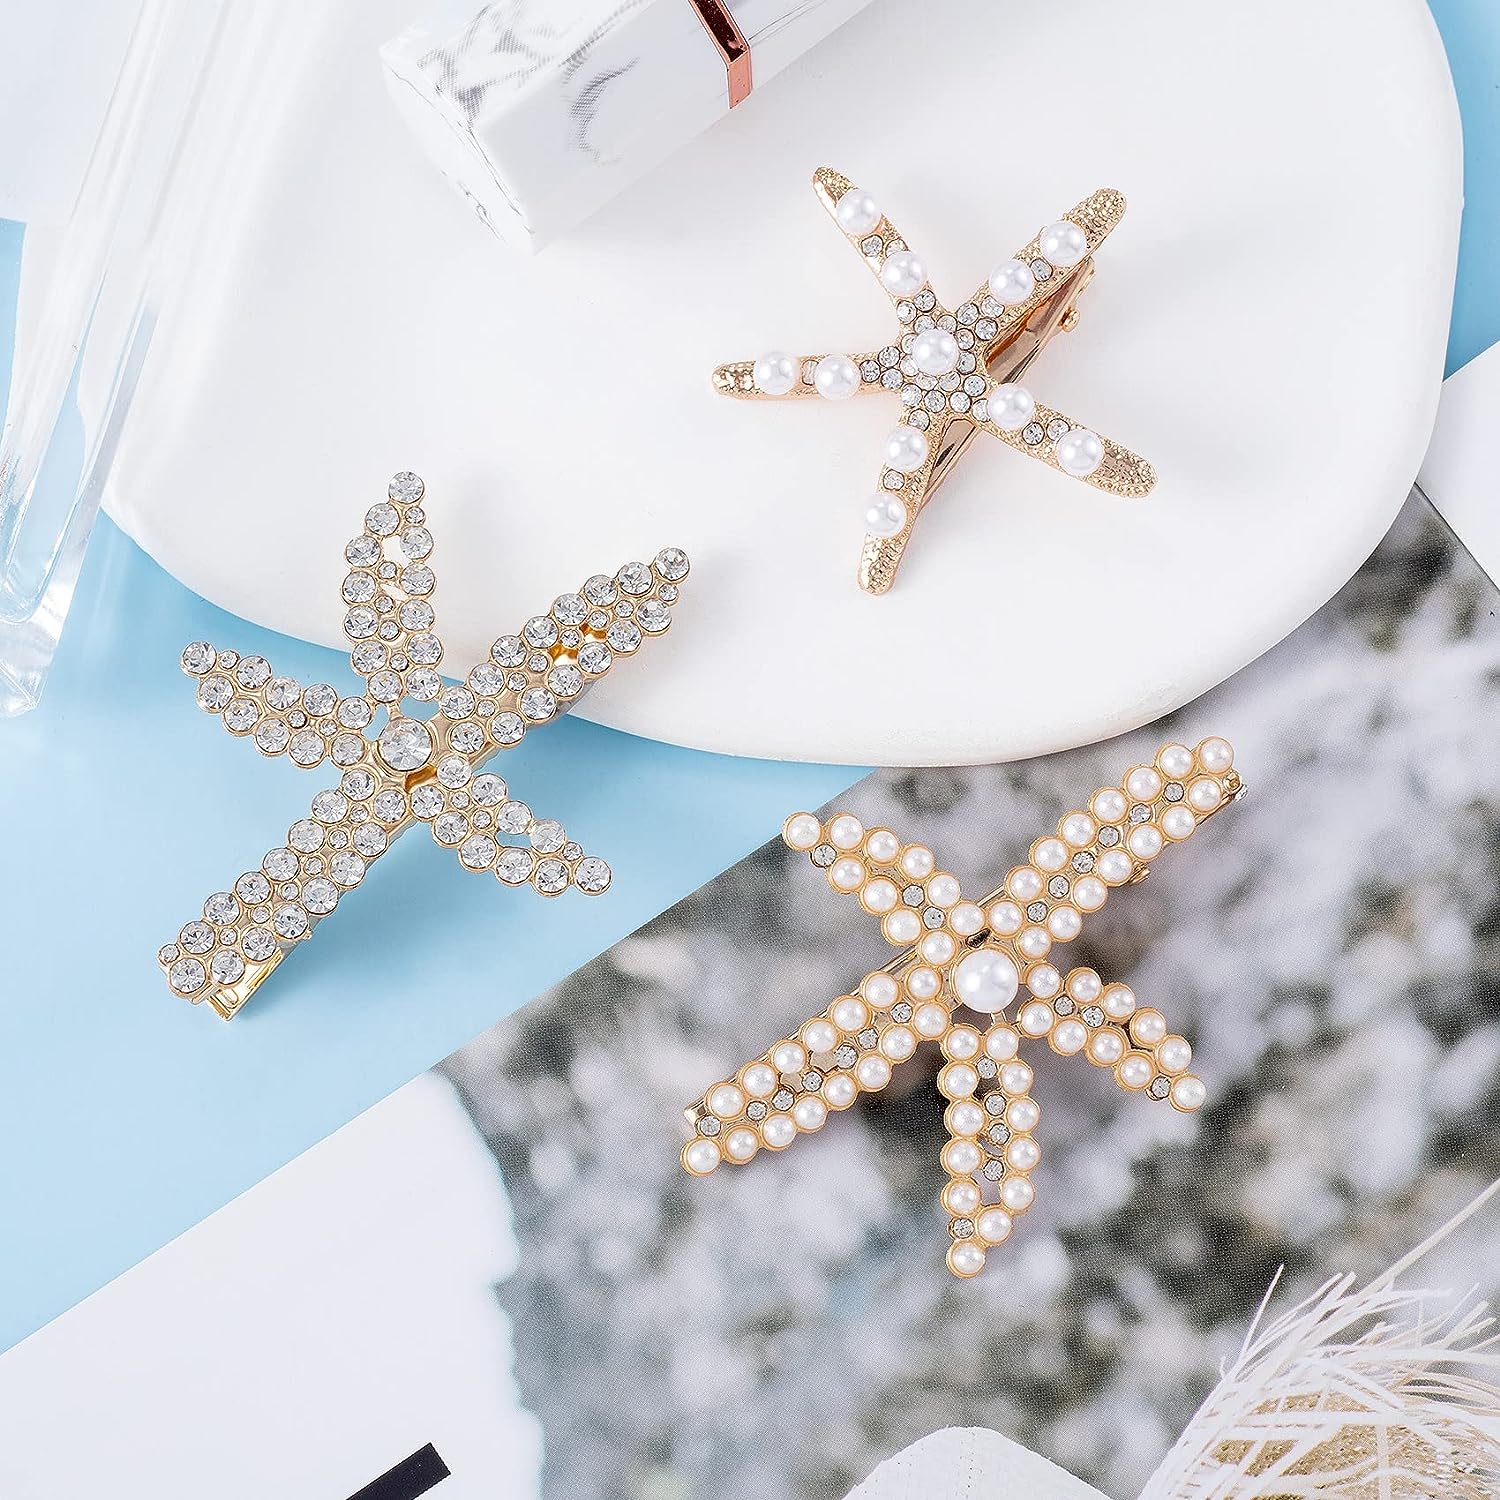 PAGOW 3 PCS Starfish Hair Clips, Gold Rhinestone Pearls Crystal Hair Clips, Sea Star Ponytail Holder, Faux Pearl Crystal Wedding Headpiece Hair Accessories For Women, Girls, Bride(1.73 x 2.48 Inch)